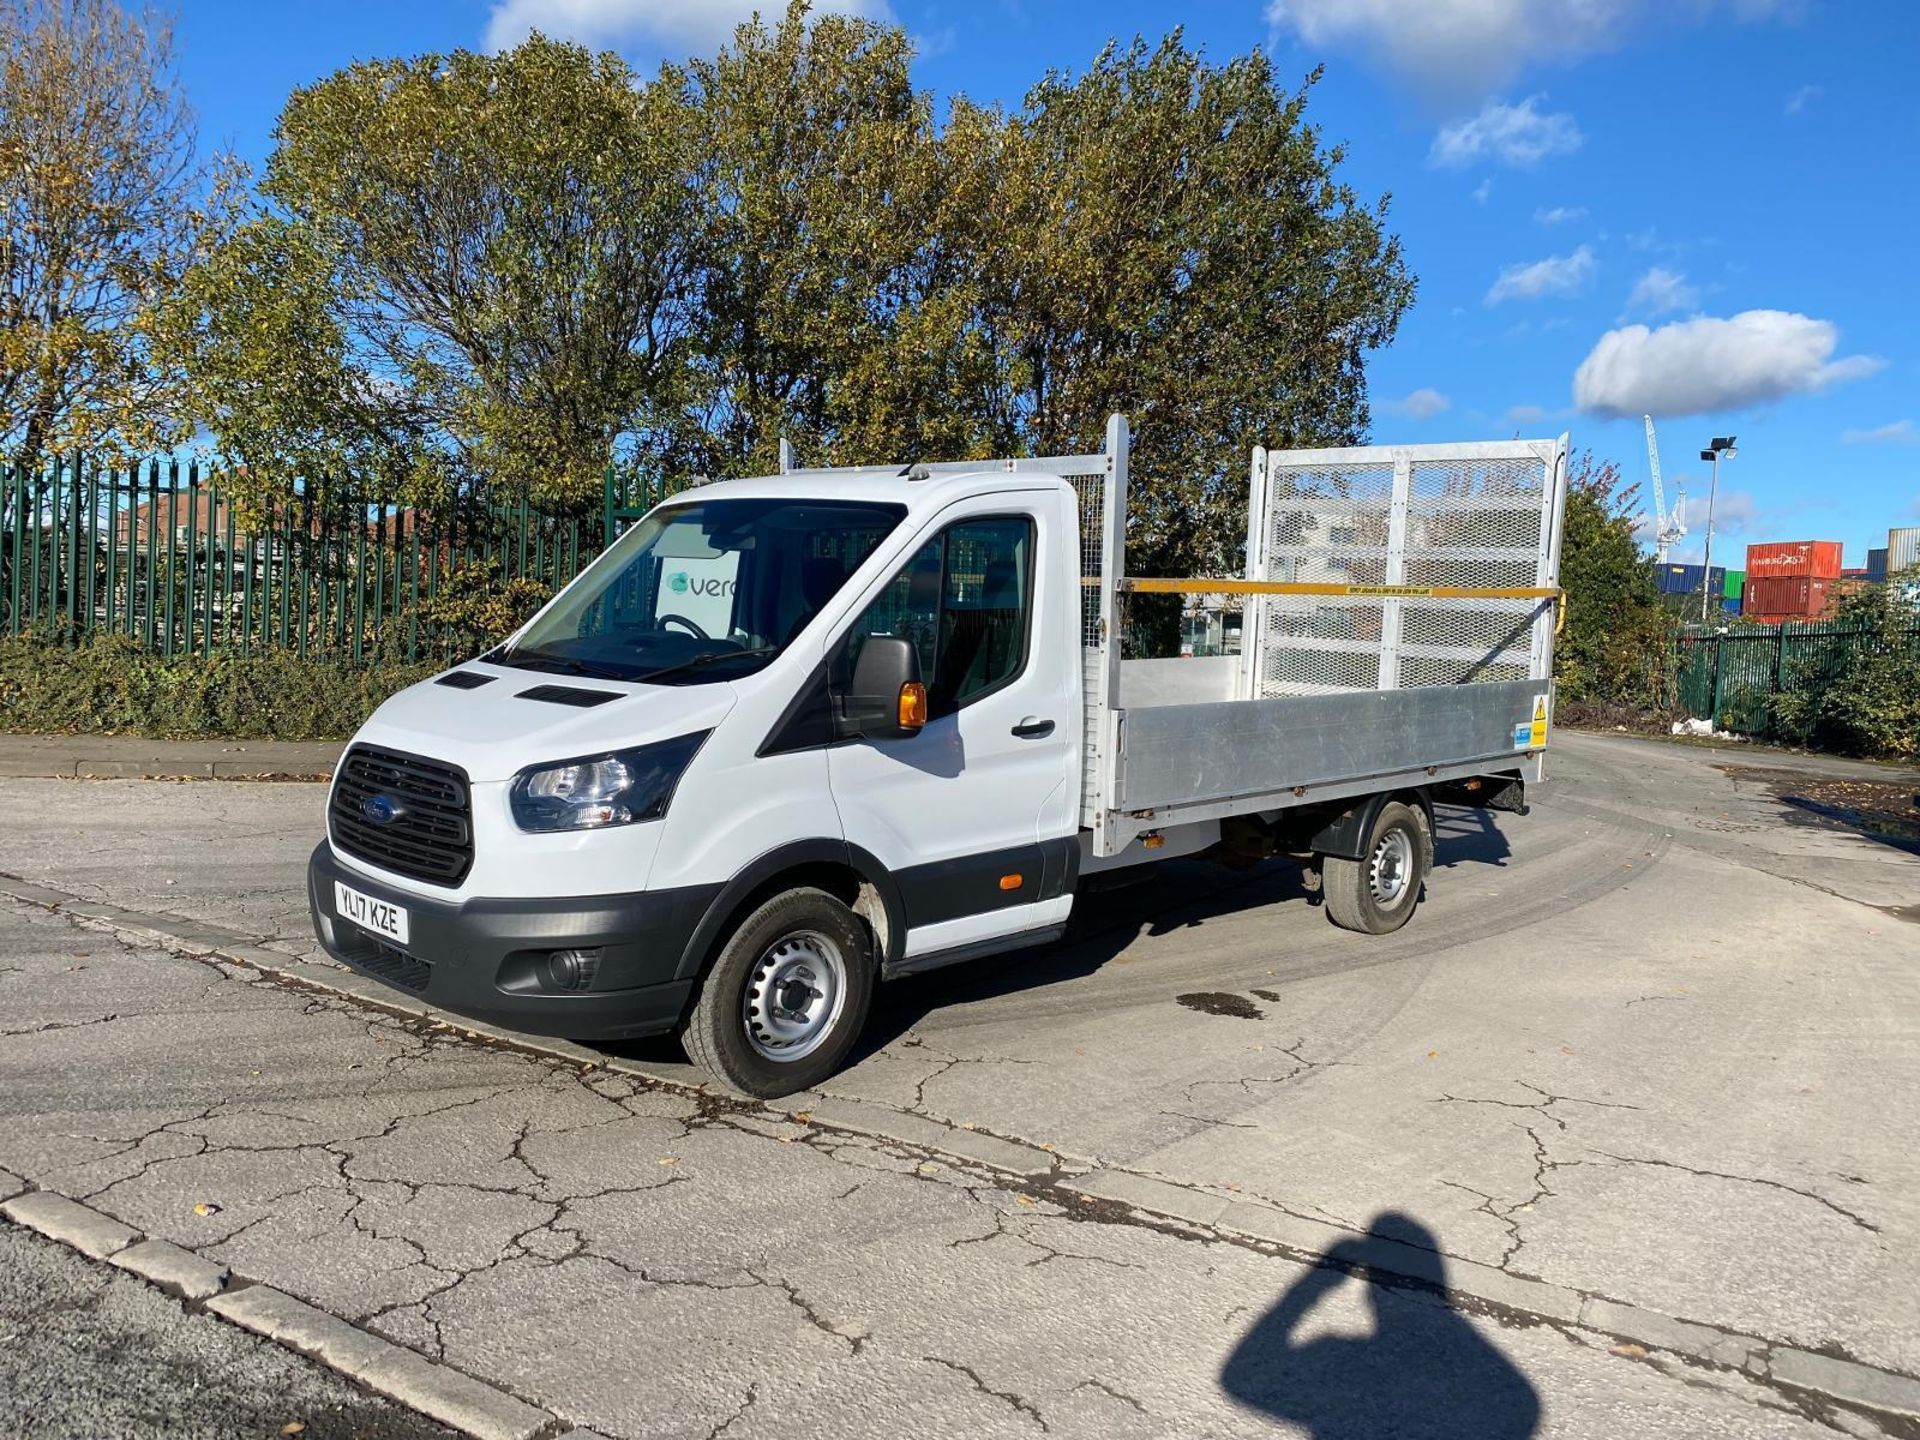 BEVERTAIL/FLATBED PICKUP TRUCK/RECOVERY (FORD TRANSIT 2017 2.0TDCI RWD 14FT) (NO VAT ON HAMMER) - Image 2 of 14